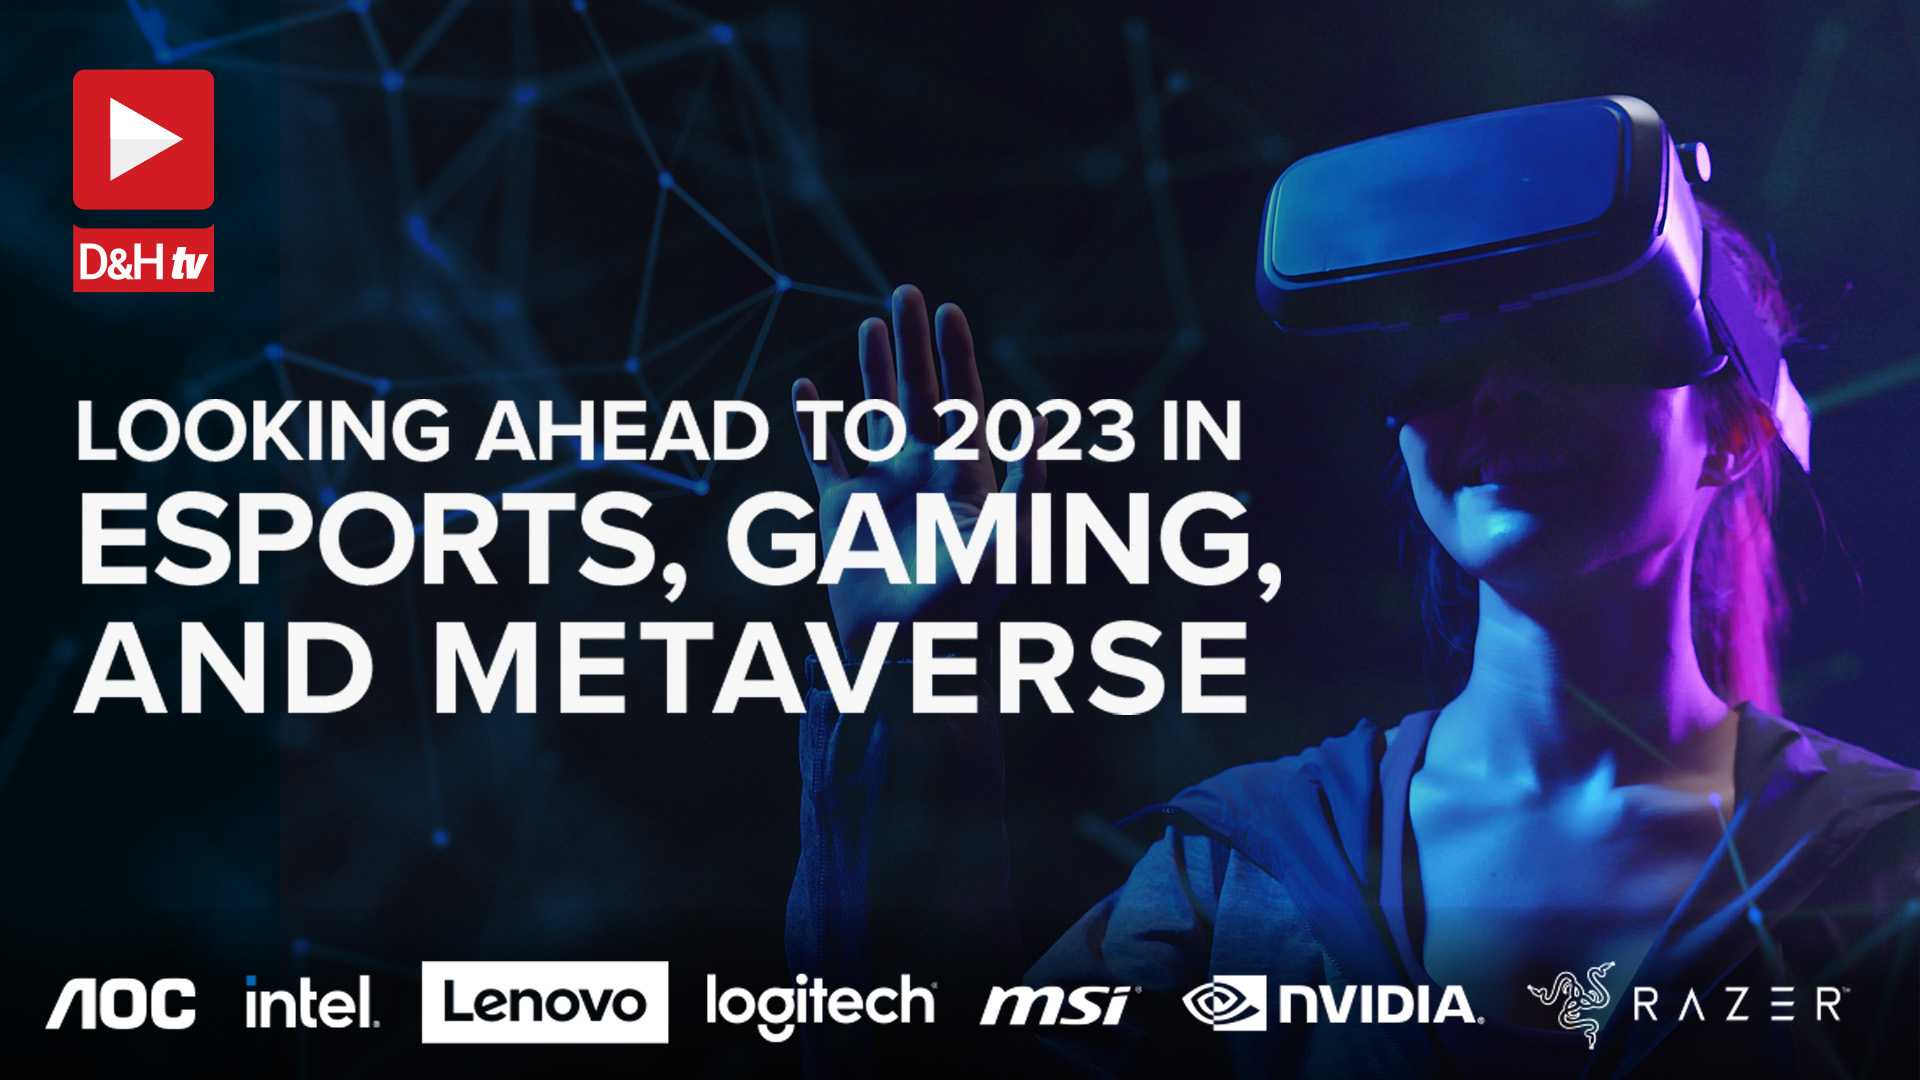 Looking ahead to 2023 in Esports, Gaming, and Metaverse